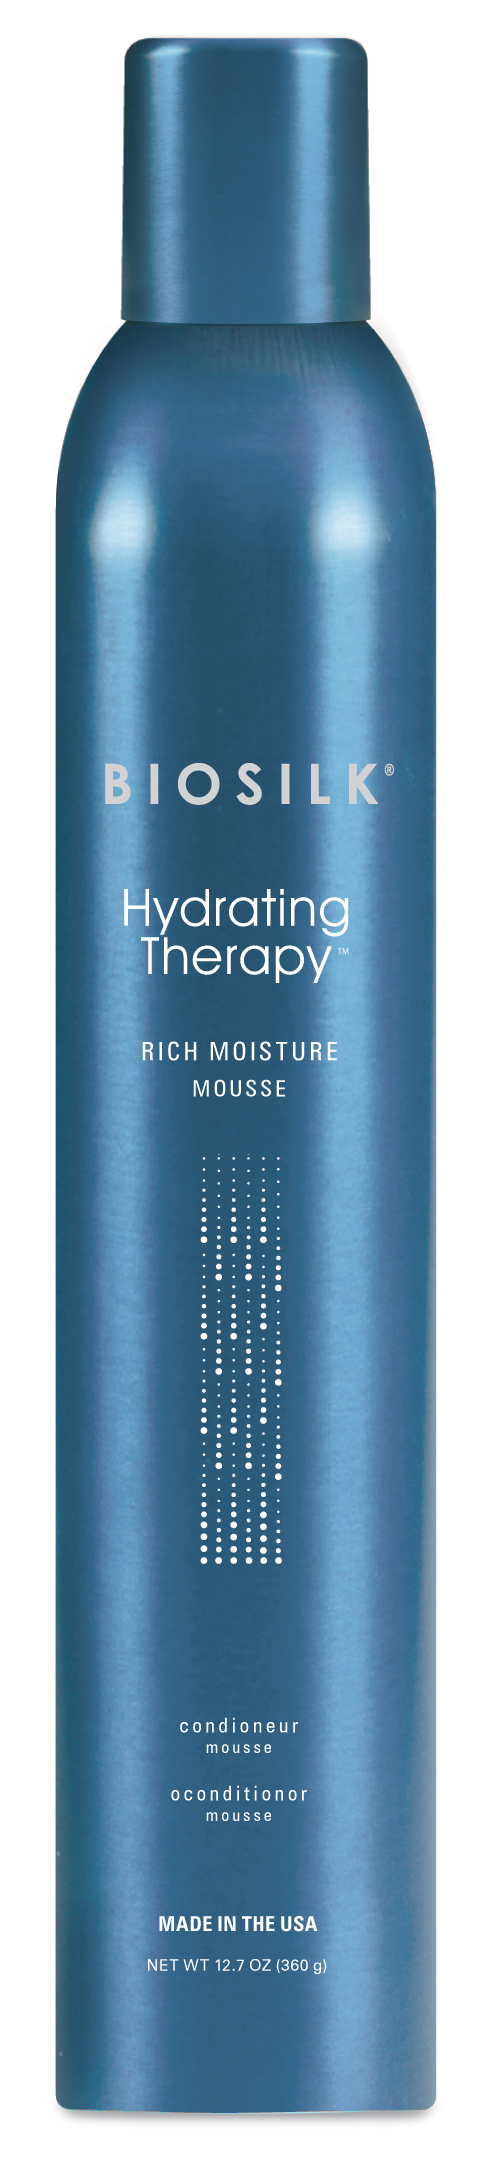 Biosilk Hydrating Therapy Rich Mousse